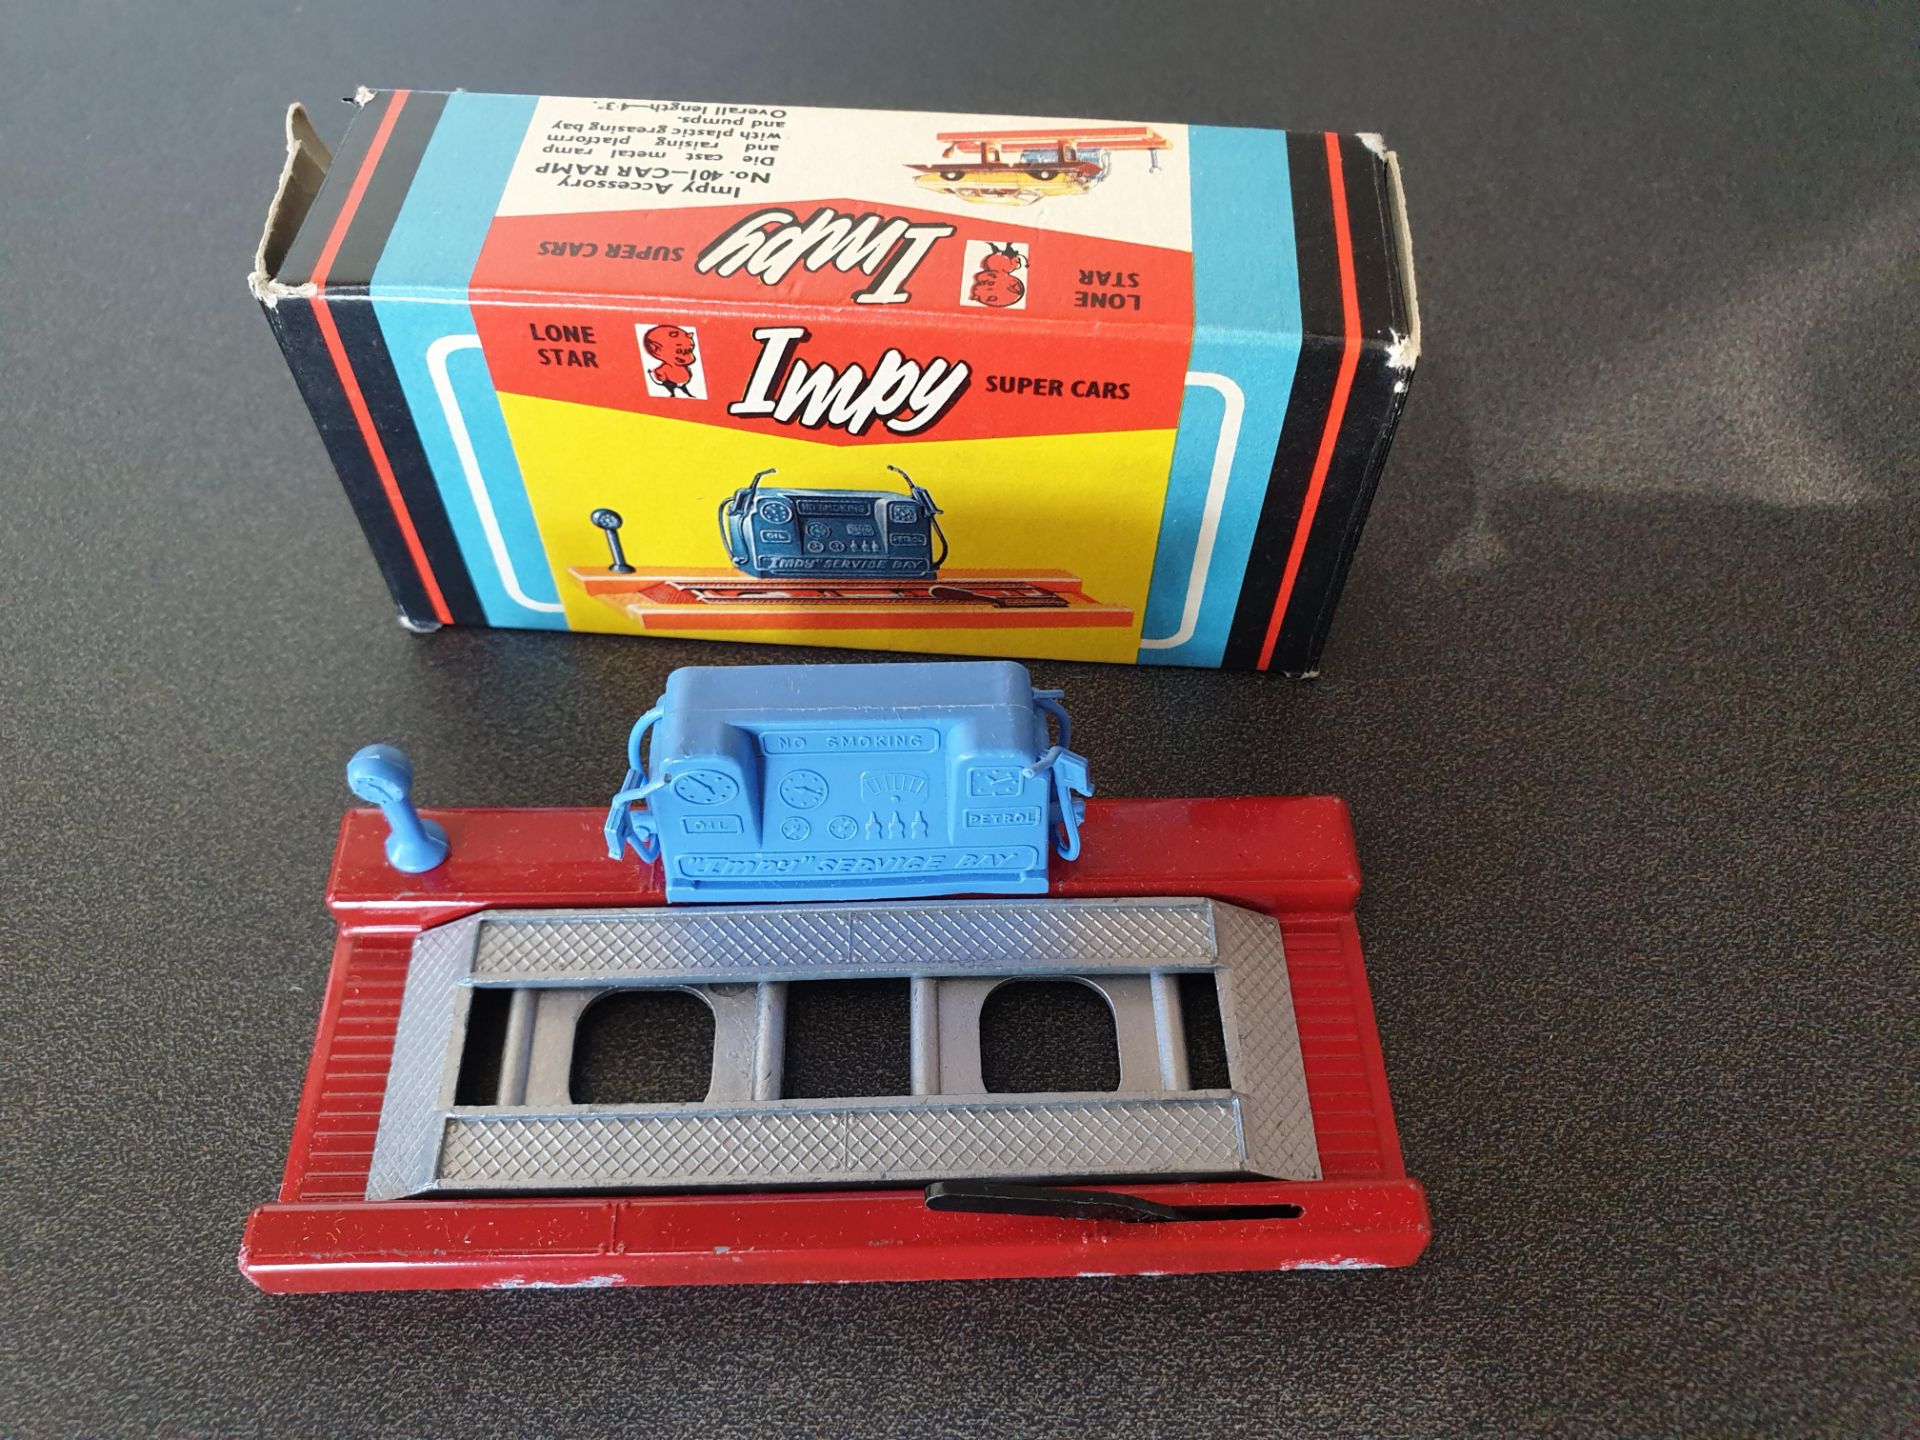 Lone Star Impy Accessory 401 Car Ramp in box - Image 2 of 2